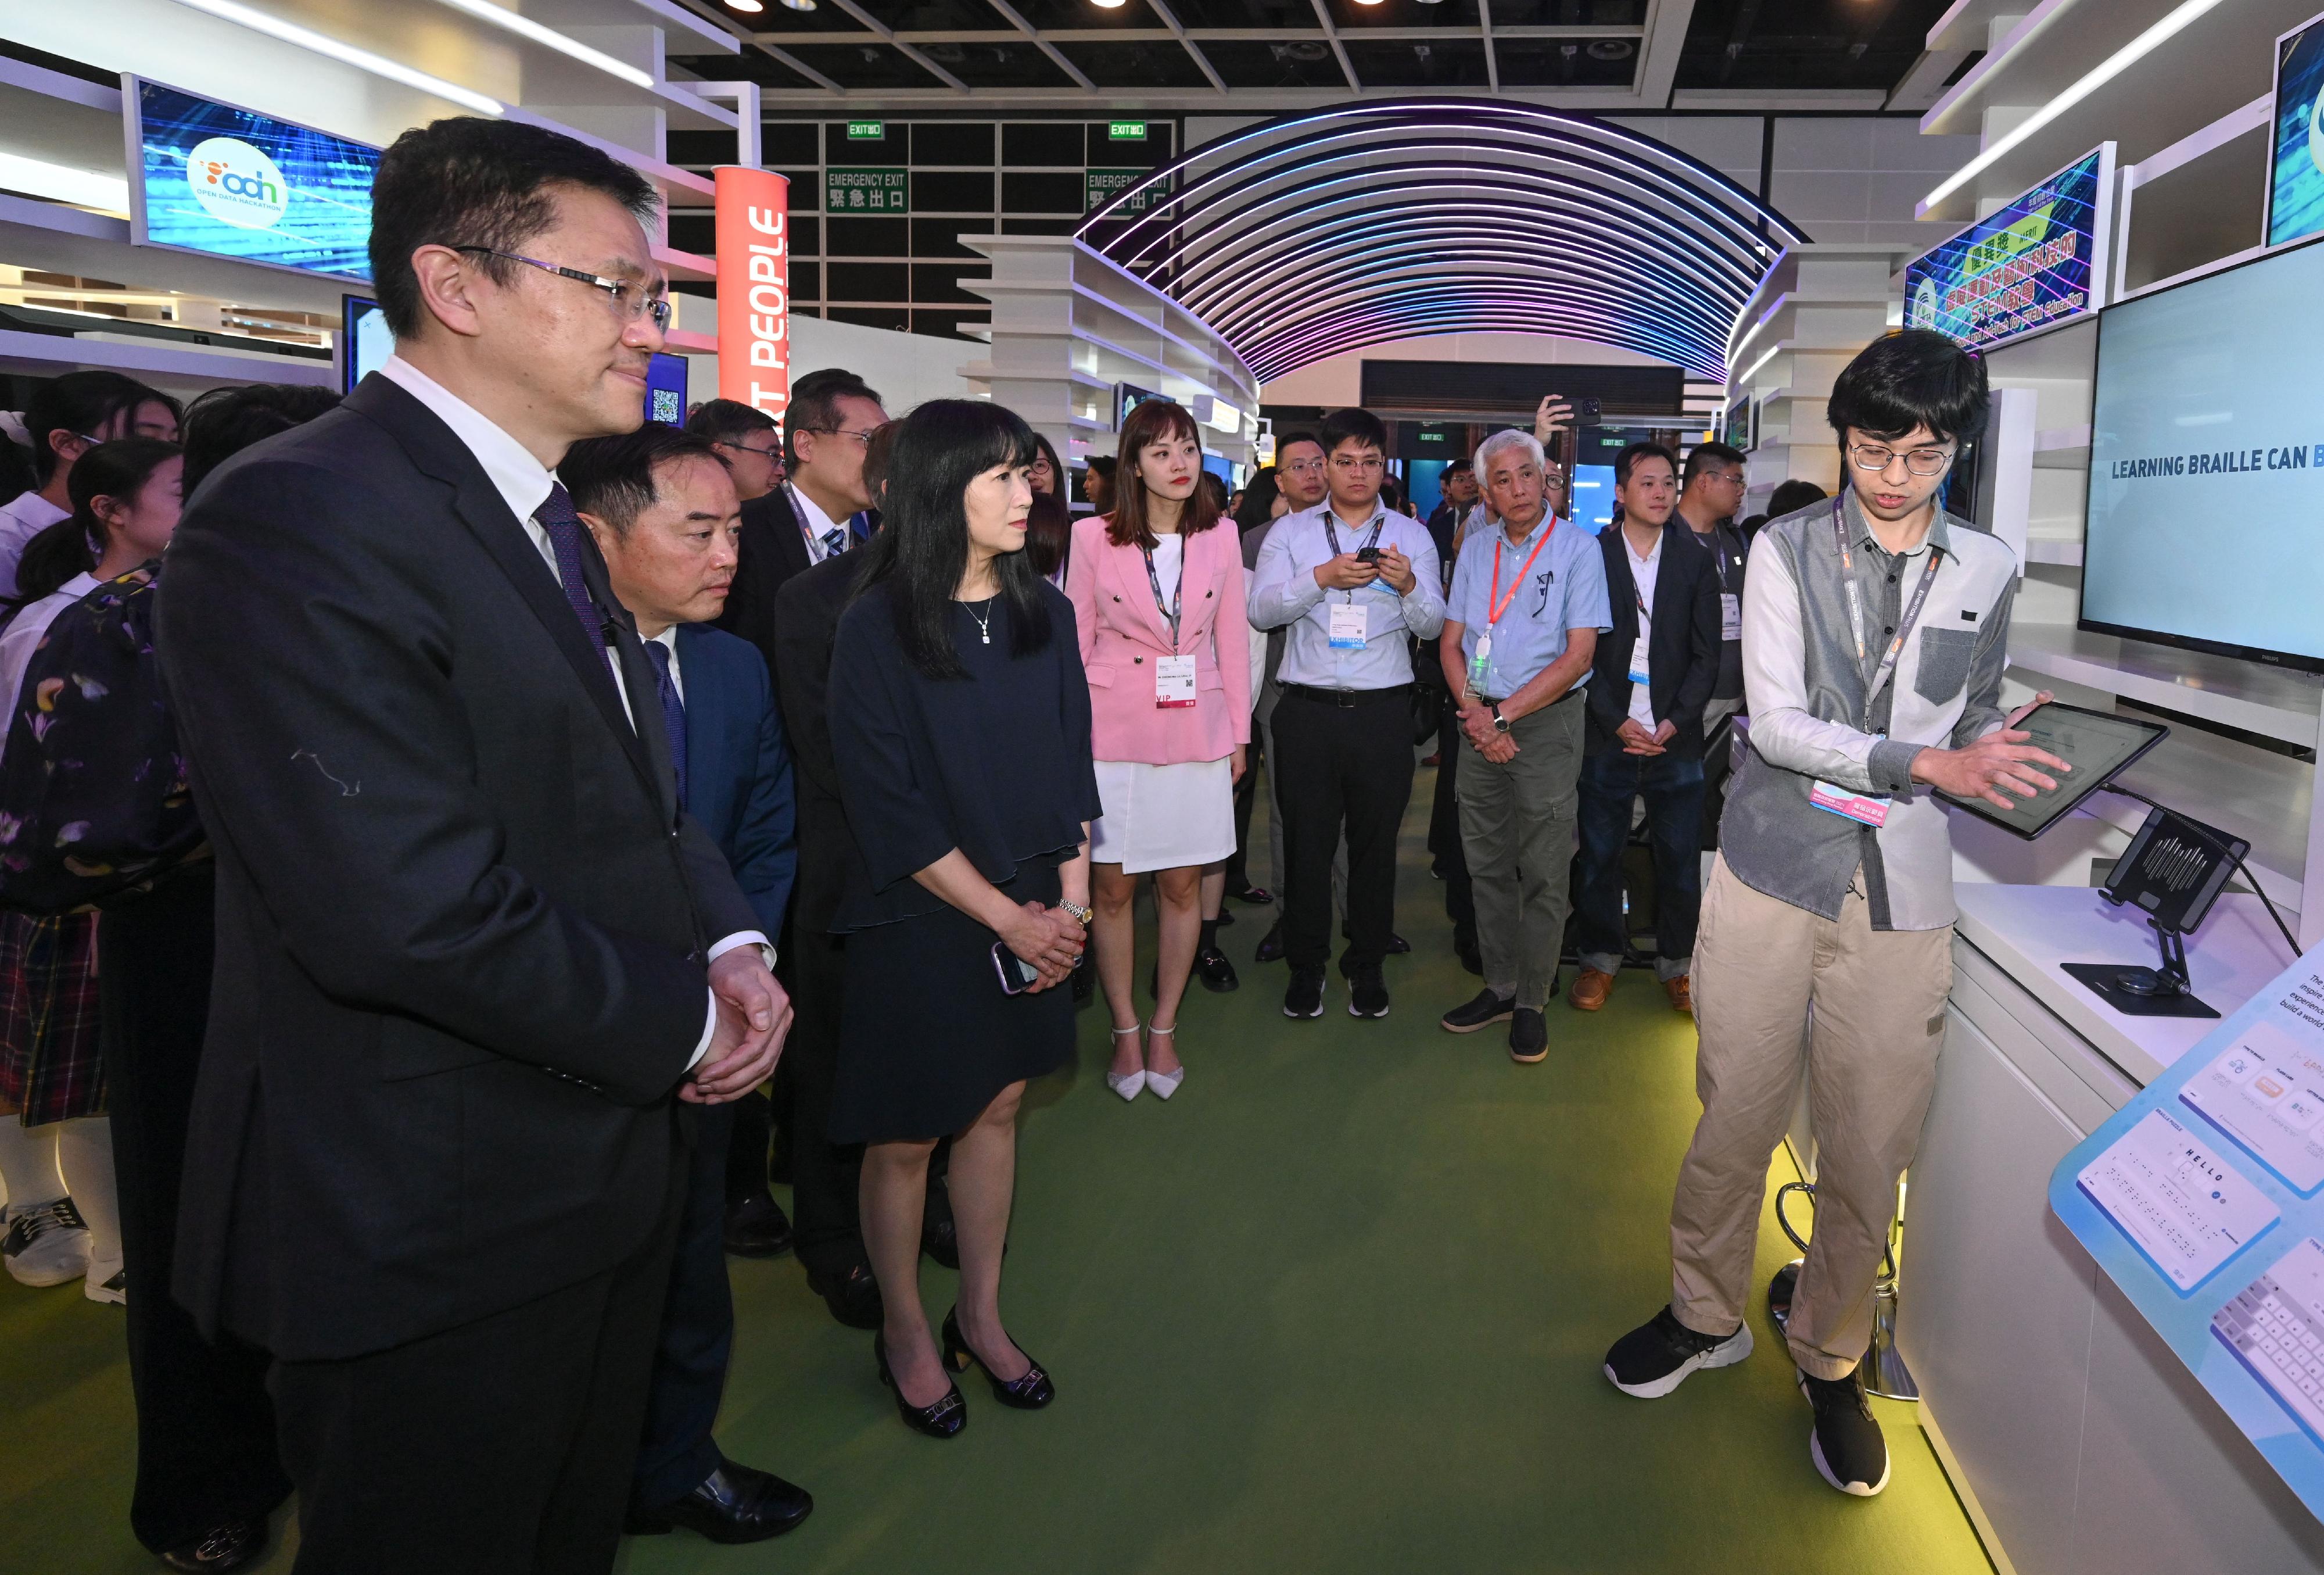 The Secretary for Innovation, Technology and Industry, Professor Sun Dong (first left), visited the "Smart Hong Kong Pavilion" at InnoEX today (April 13) and was briefed on the "Braille Learning App" project. Looking on are Under Secretary for Innovation, Technology and Industry, Ms Lillian Cheong (fourth left); the Government Chief Information Officer, Mr Tony Wong (second left); and the Executive Director of the Hong Kong Trade Development Council, Ms Margaret Fong (third left). The project was developed by a tertiary student who has also won the gold medal in the Guangzhou / Hong Kong / Macao / Chengdu Youth Skills Competition.